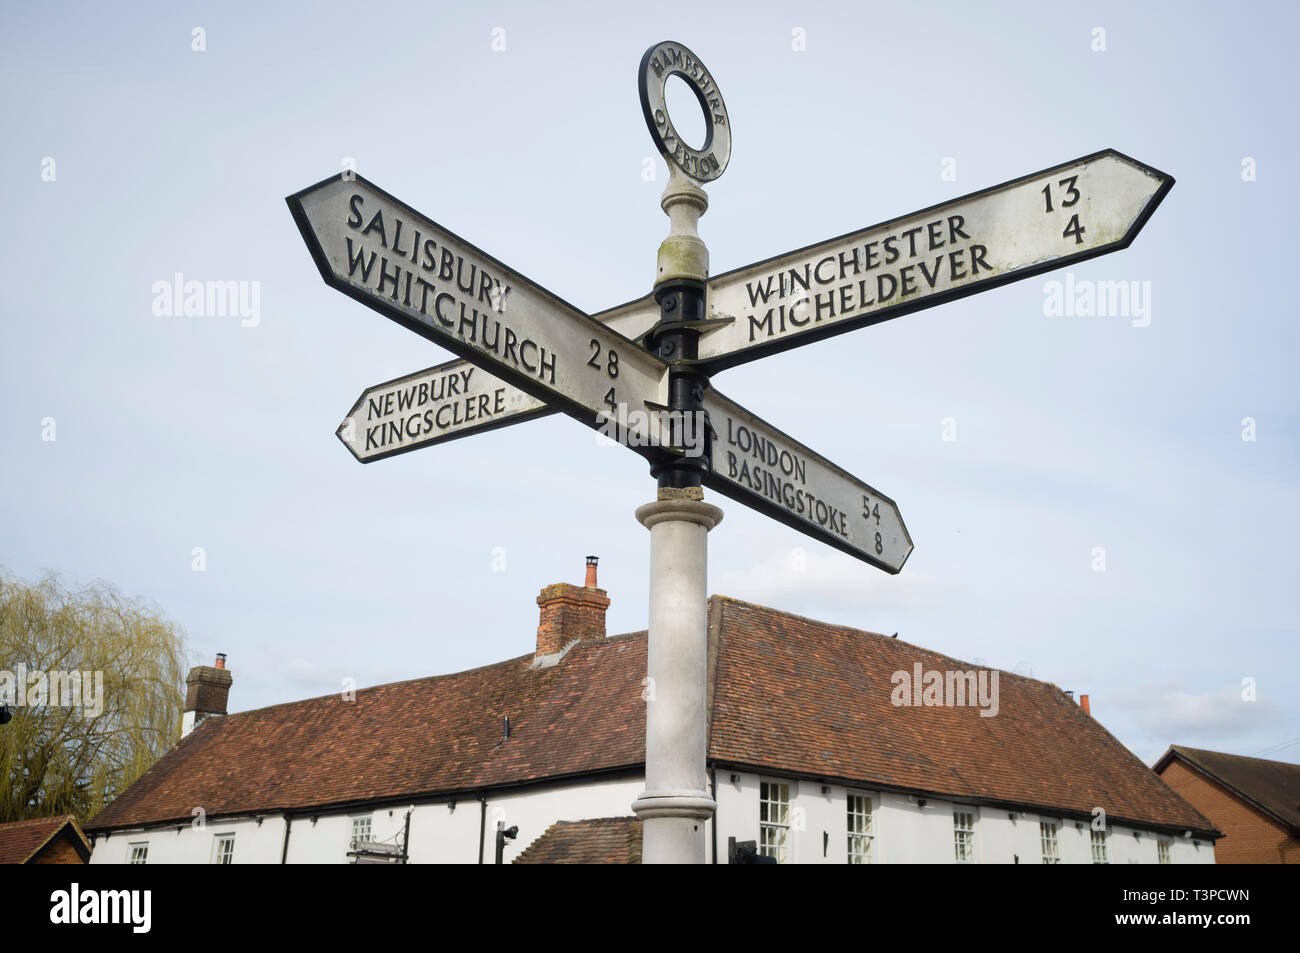 Une vieille fonte direction sign in Overton, Hampshire pointant vers Salisbury, Whitchurch, Winchester, Micheldever, Newbury & Kingsclere Banque D'Images